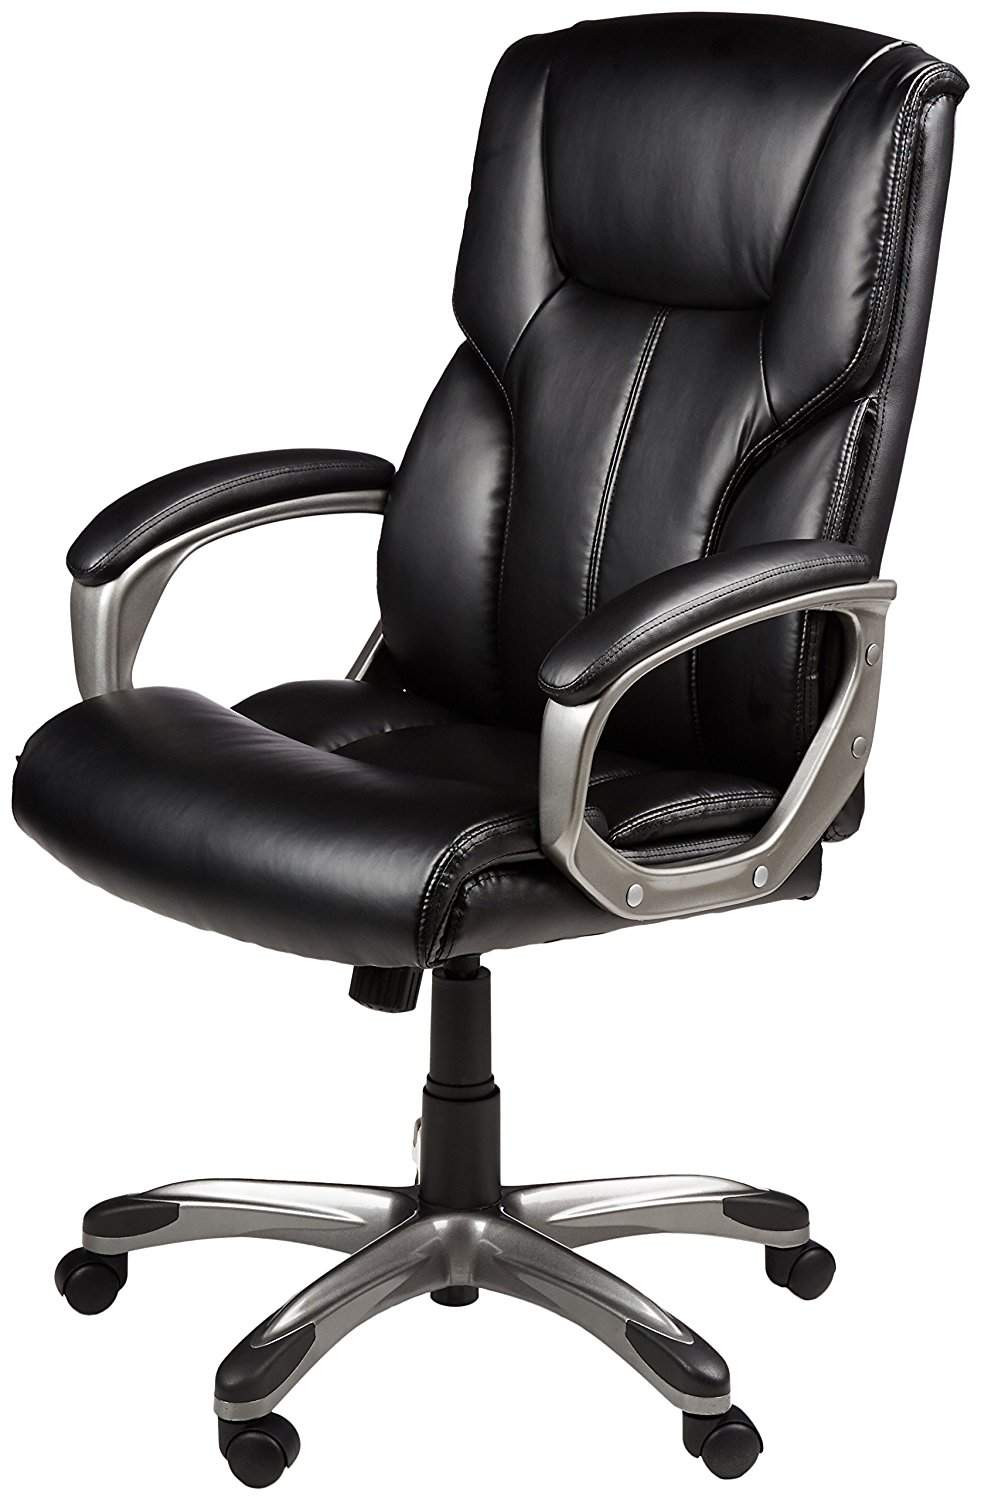 The top 20 Ideas About Ergonomic Desk Chair - Best Collections Ever